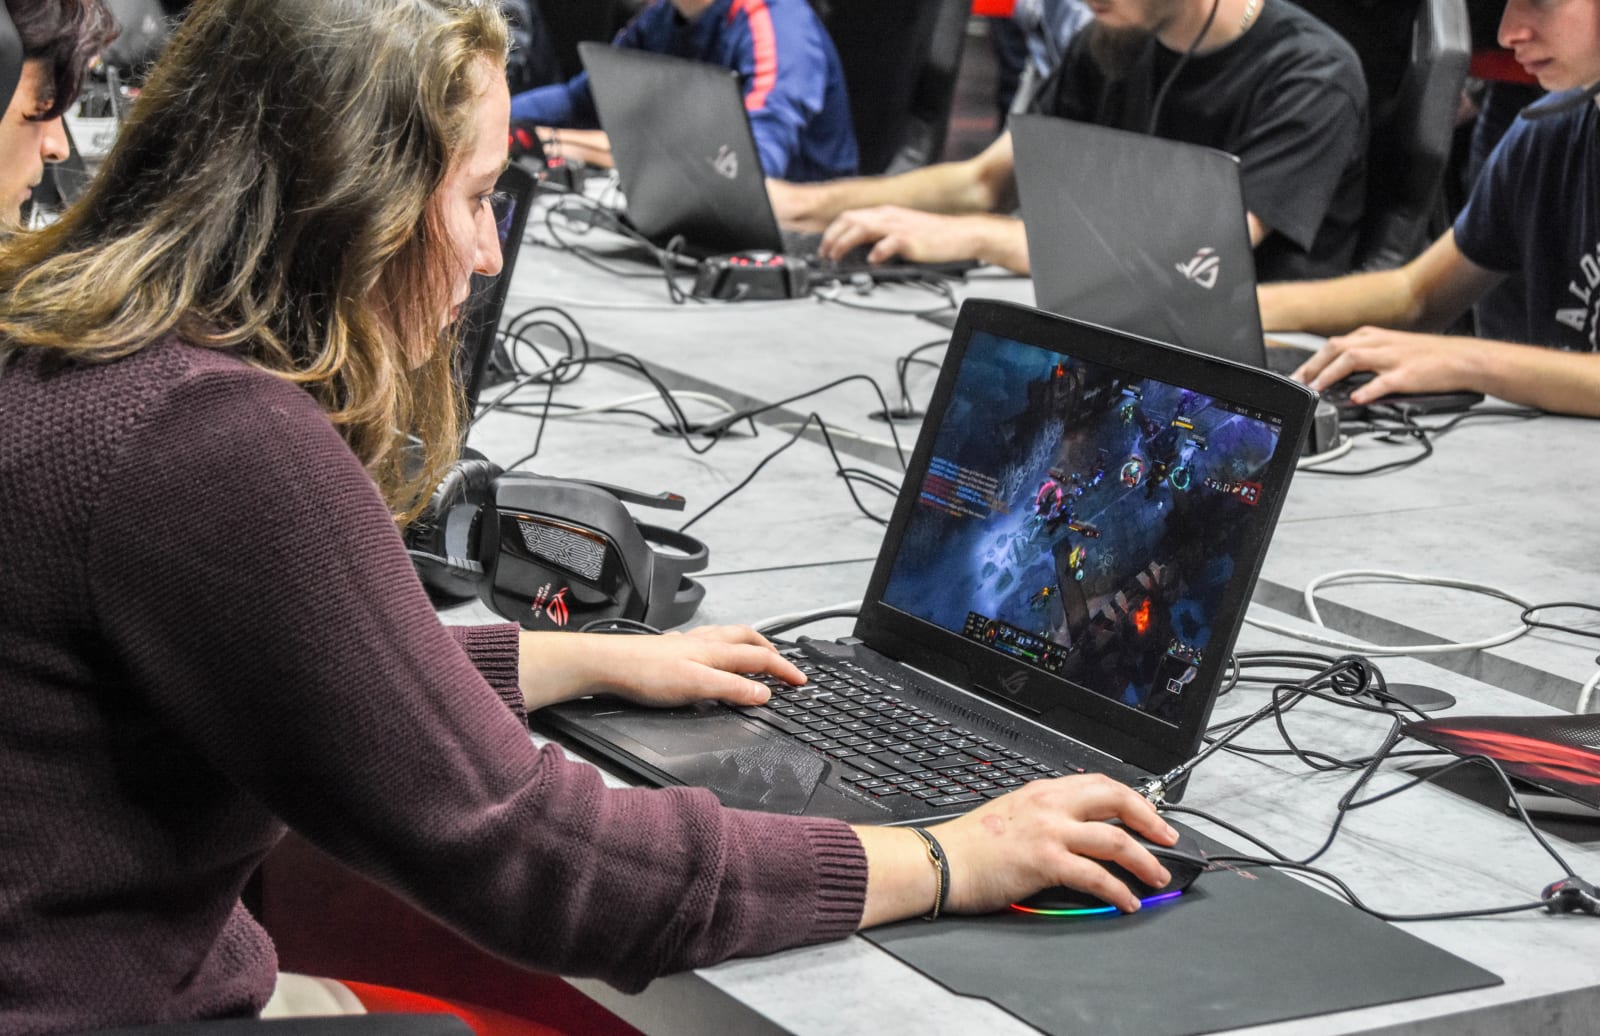 A female participants seen playing online game on a laptop...